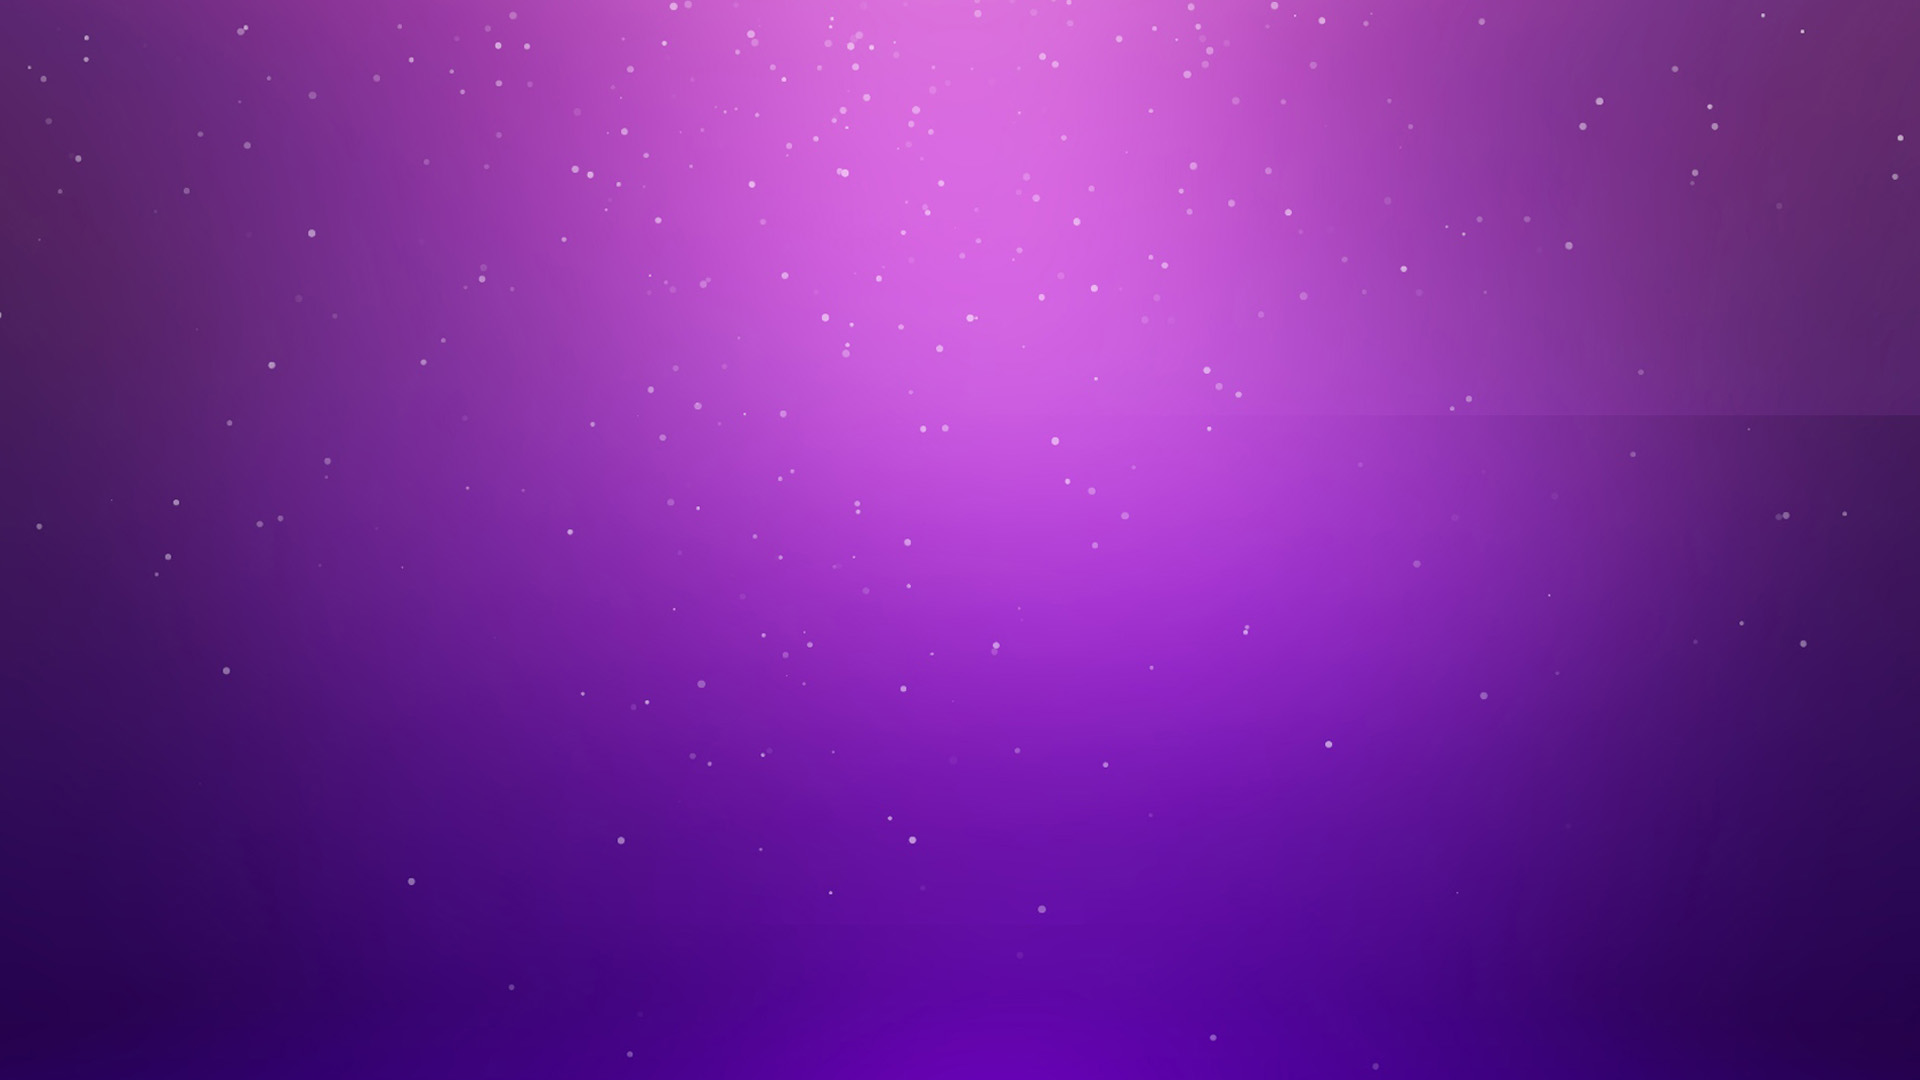 Simple Purple Wallpapers, Green Backgrounds, Pictures and images